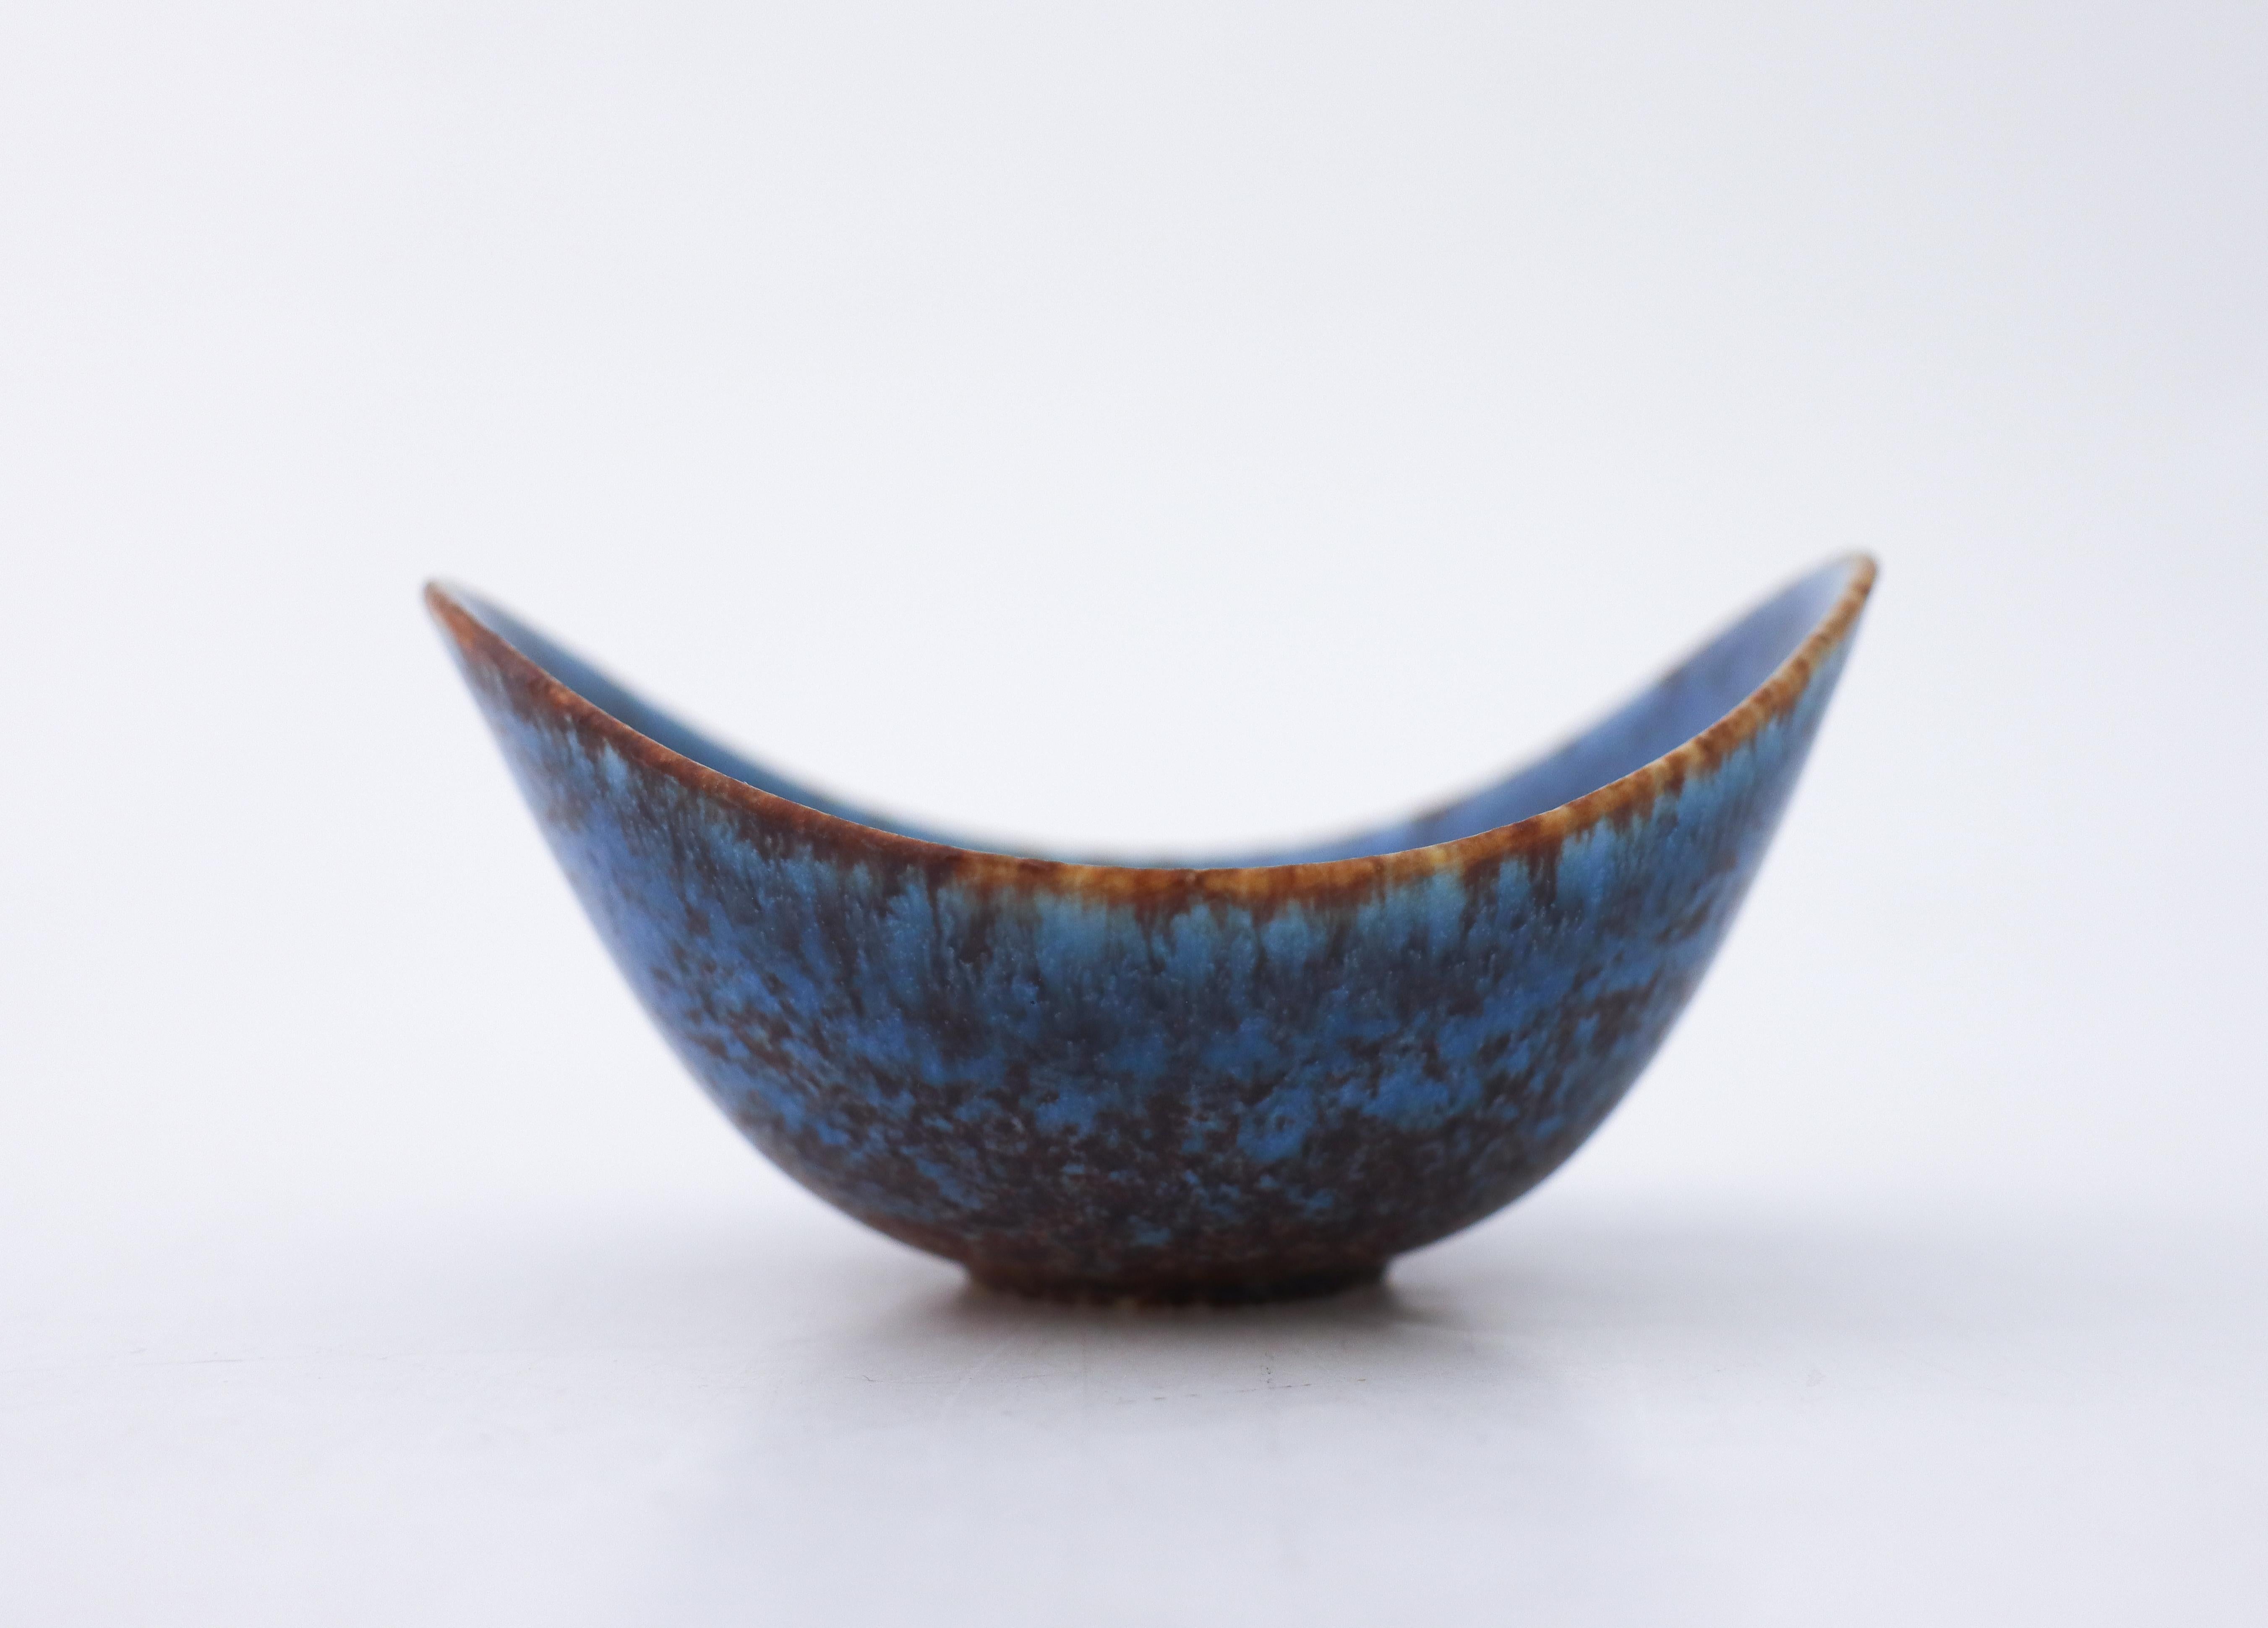 A blue bowl designed by Gunnar Nylund at Rörstrand, the bowl is 5 cm (2